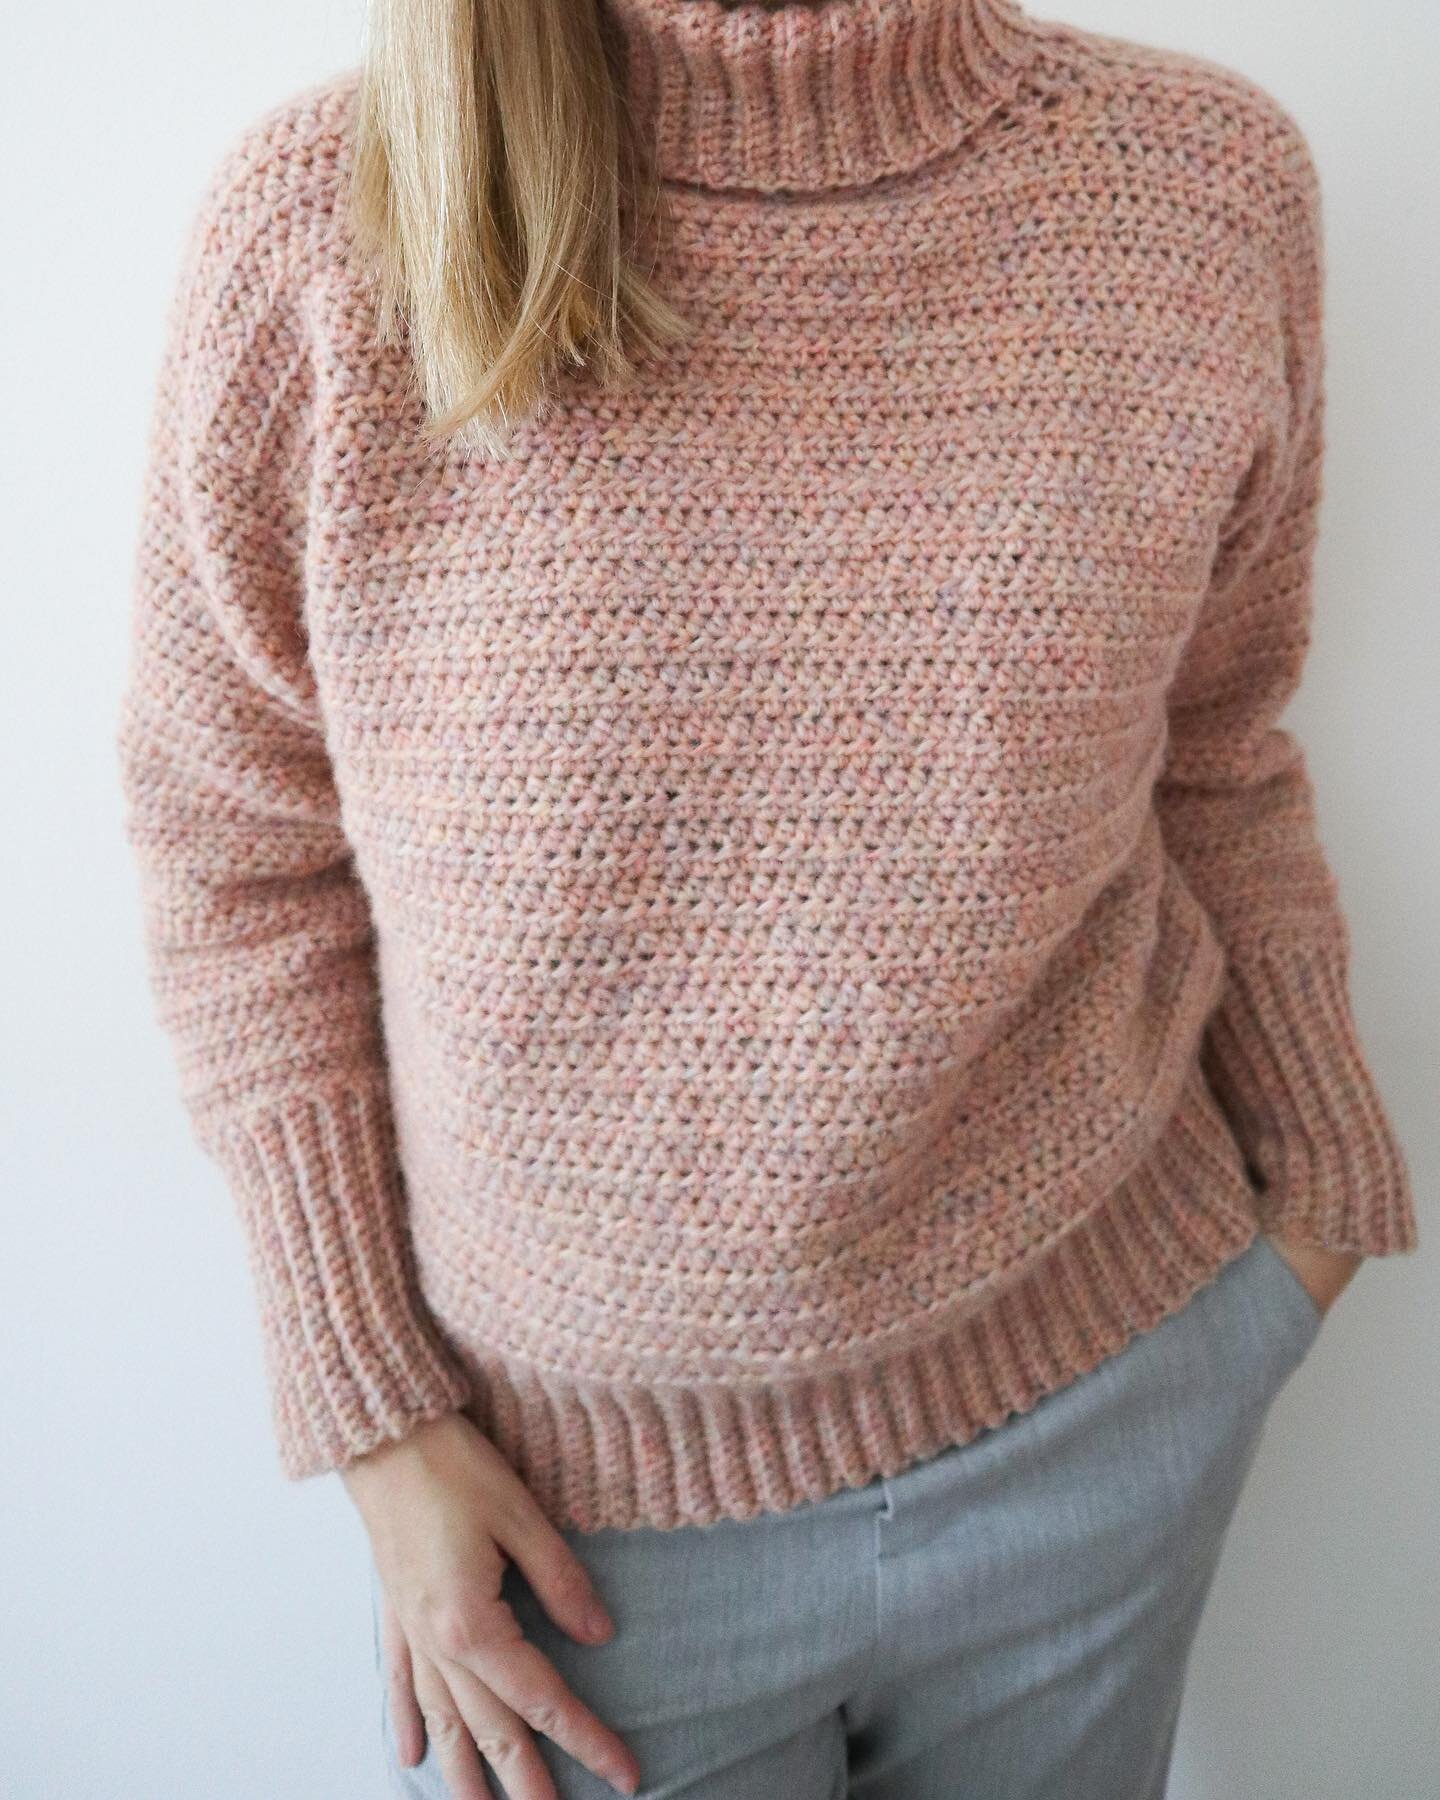 Here is the finished crochet Mohair Dreams Sweater in its new yarn option. The original yarn got discounted so I remade it in a yarn that is available in case you&rsquo;d which to use the same yarn. Here it is made using the Feeling Good Yarn @woolan